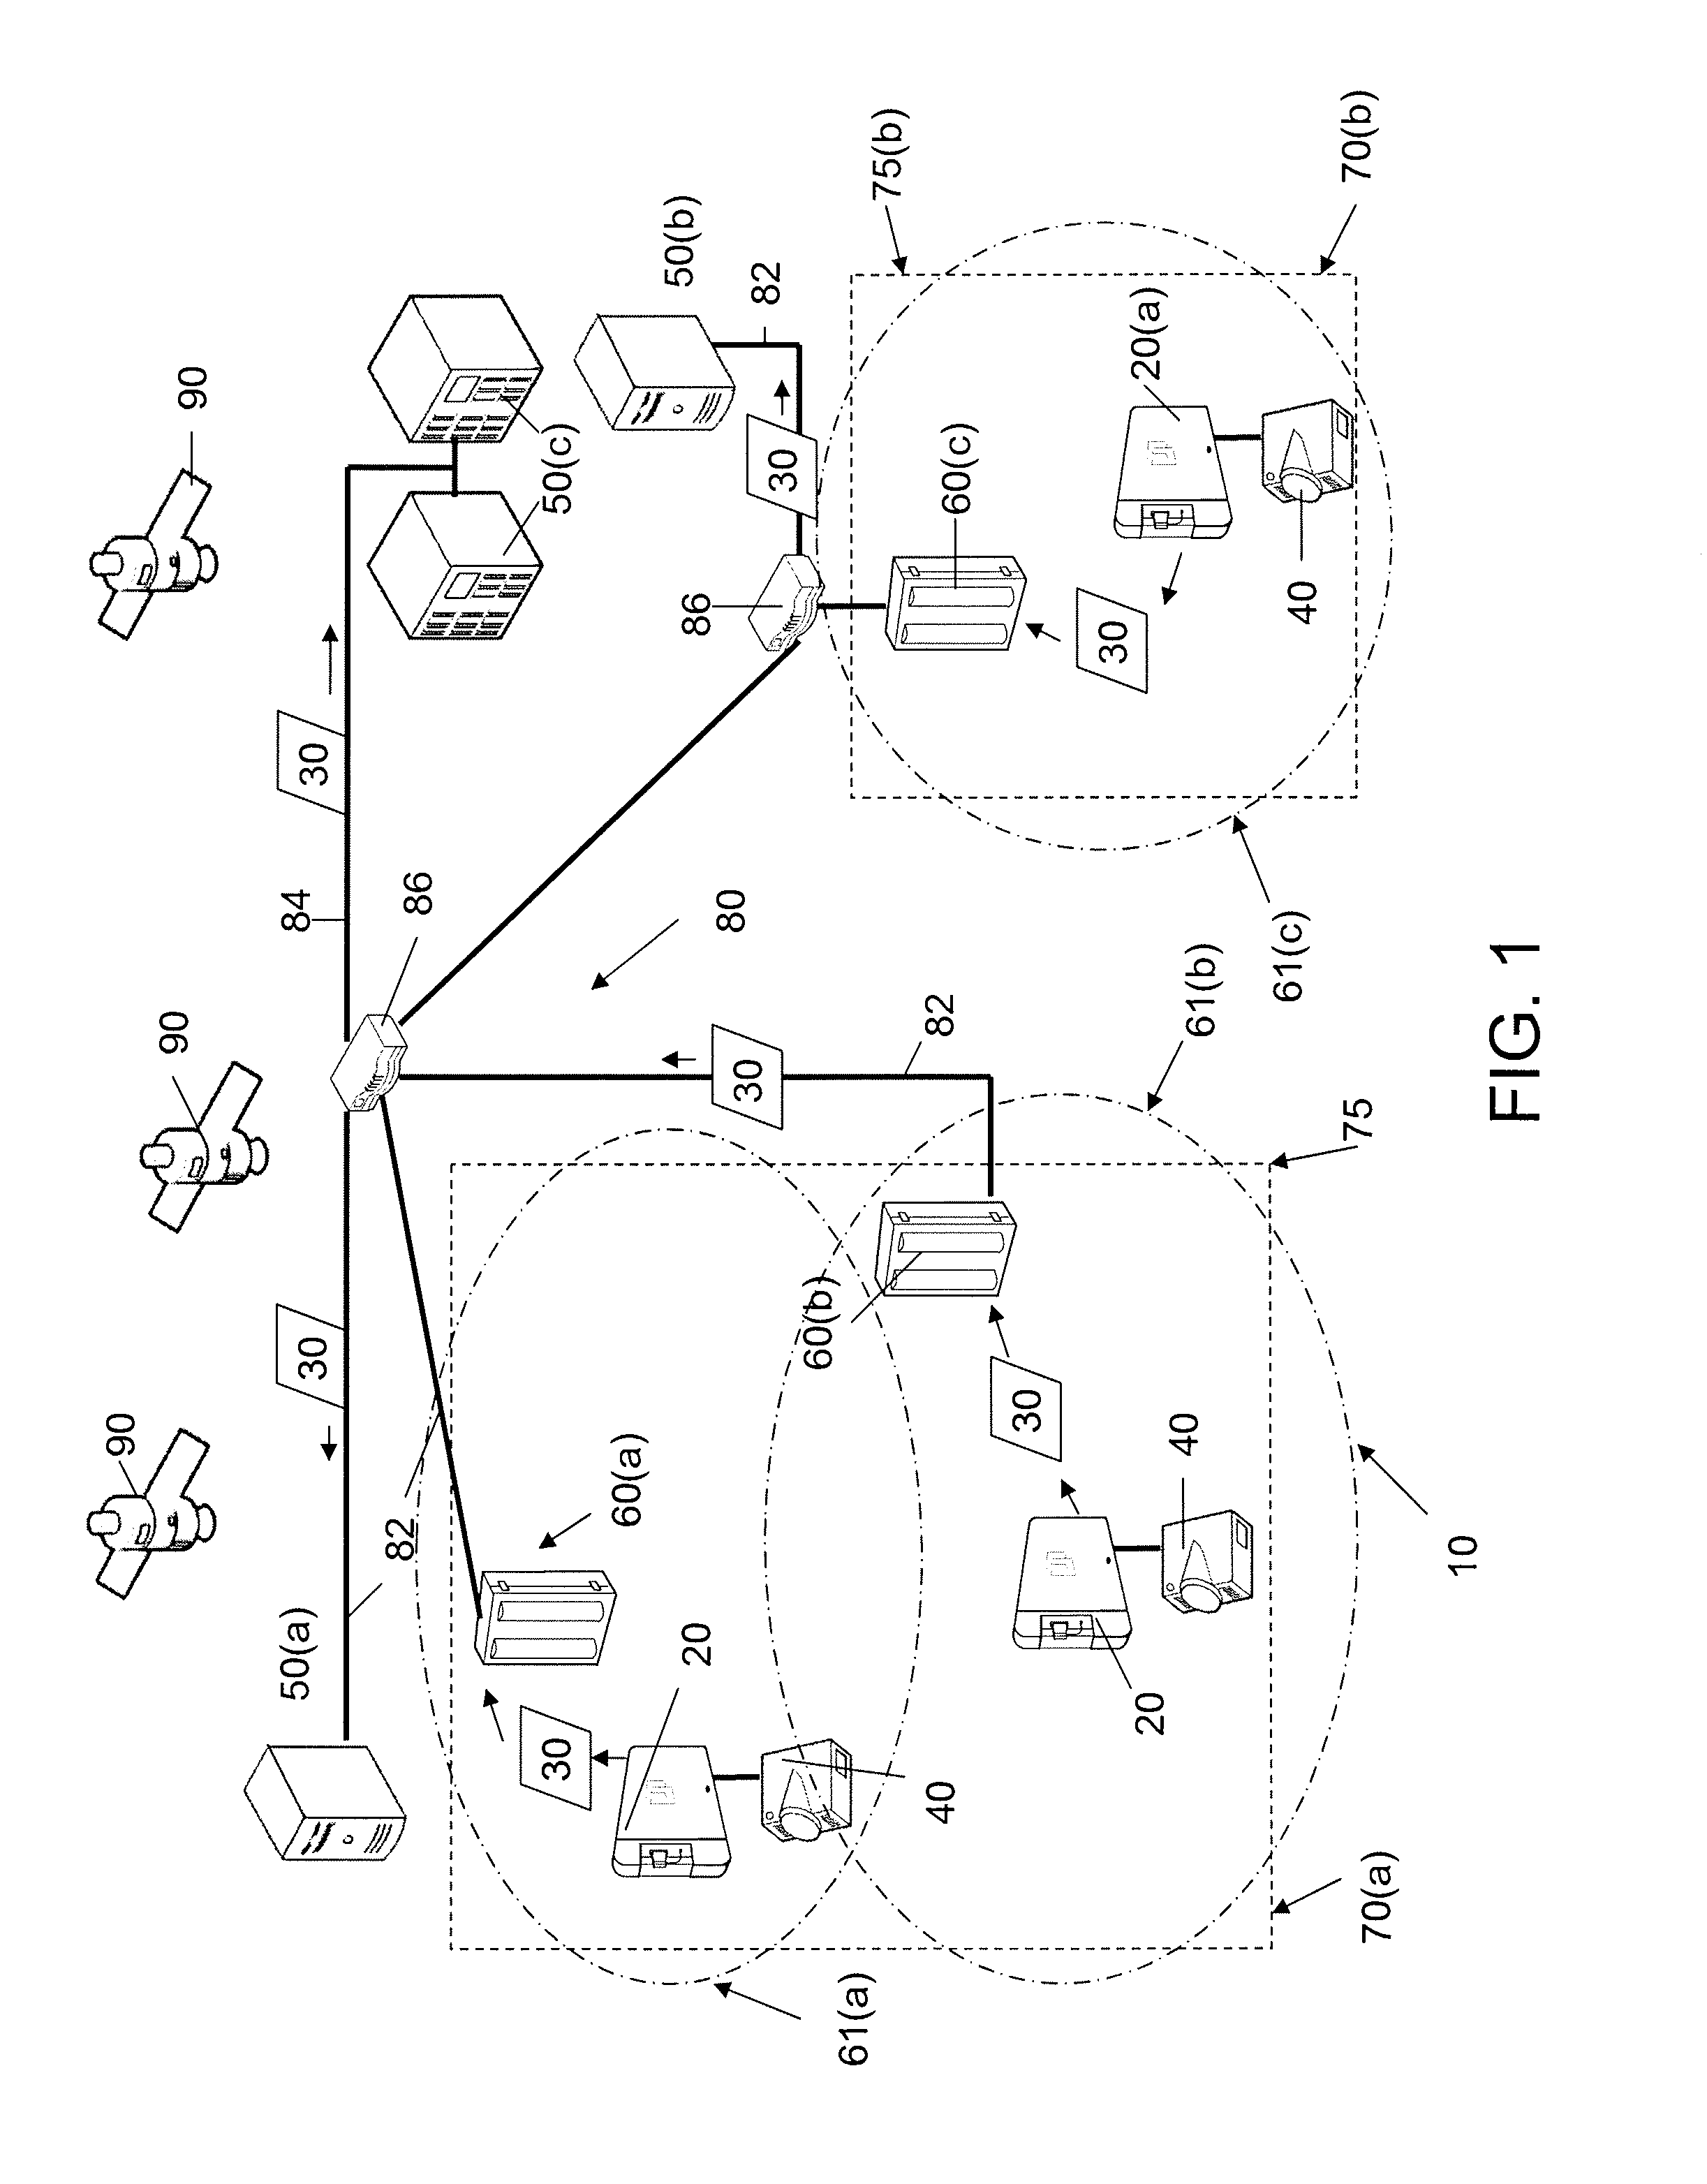 System and method for uploading files to servers utilizing GPS routing